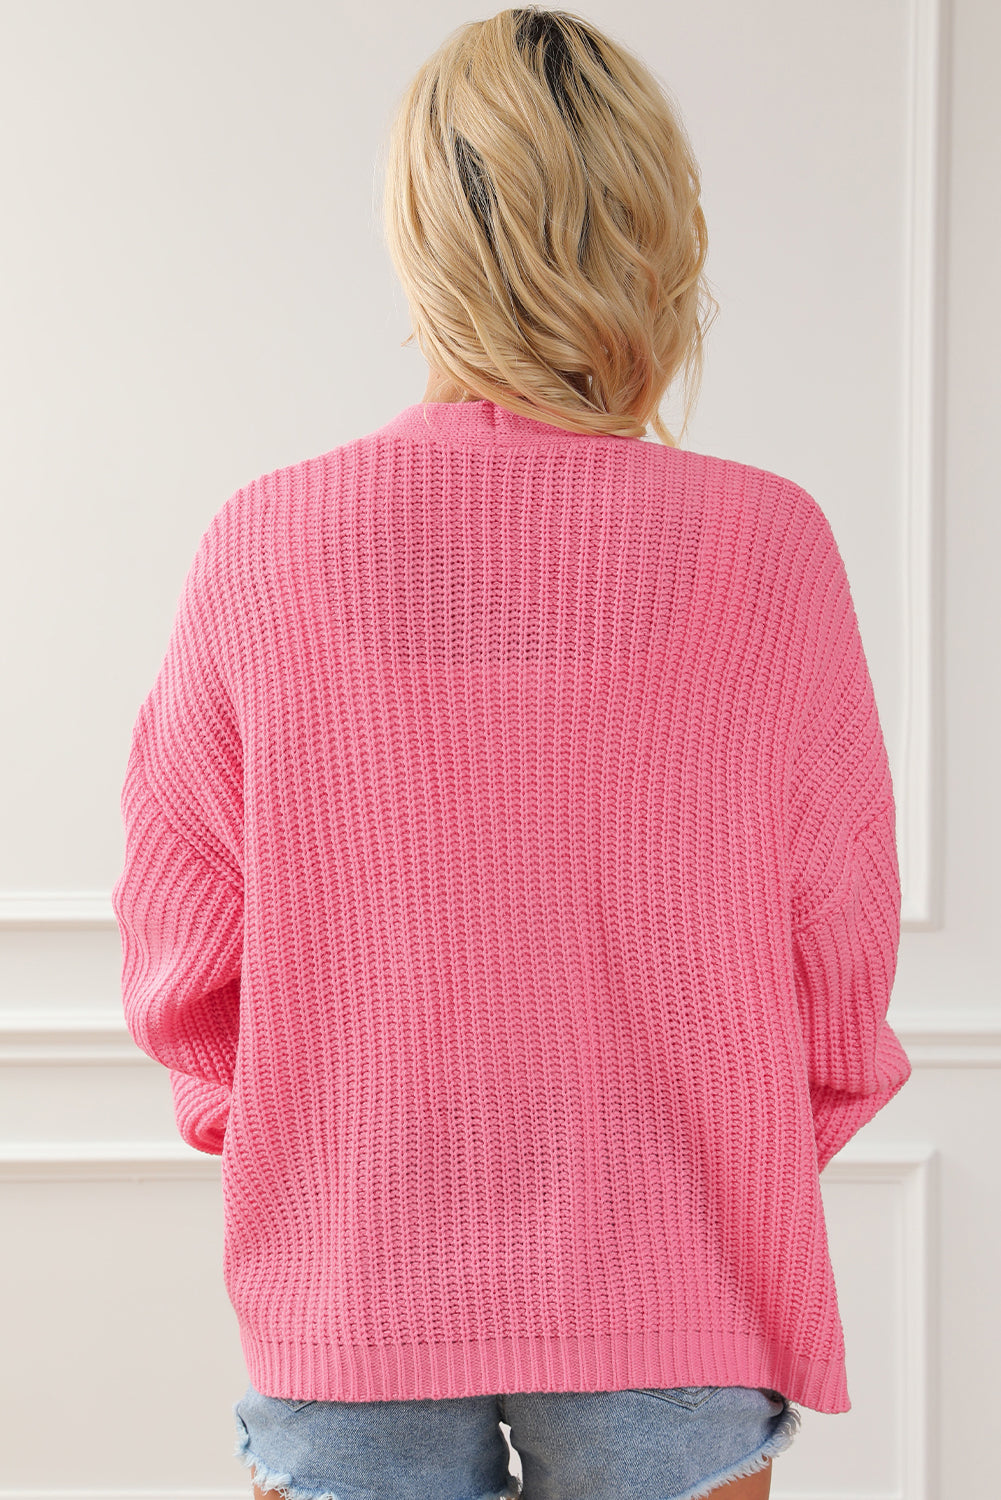 Pink Solid Pocketed Open Short Cardigan